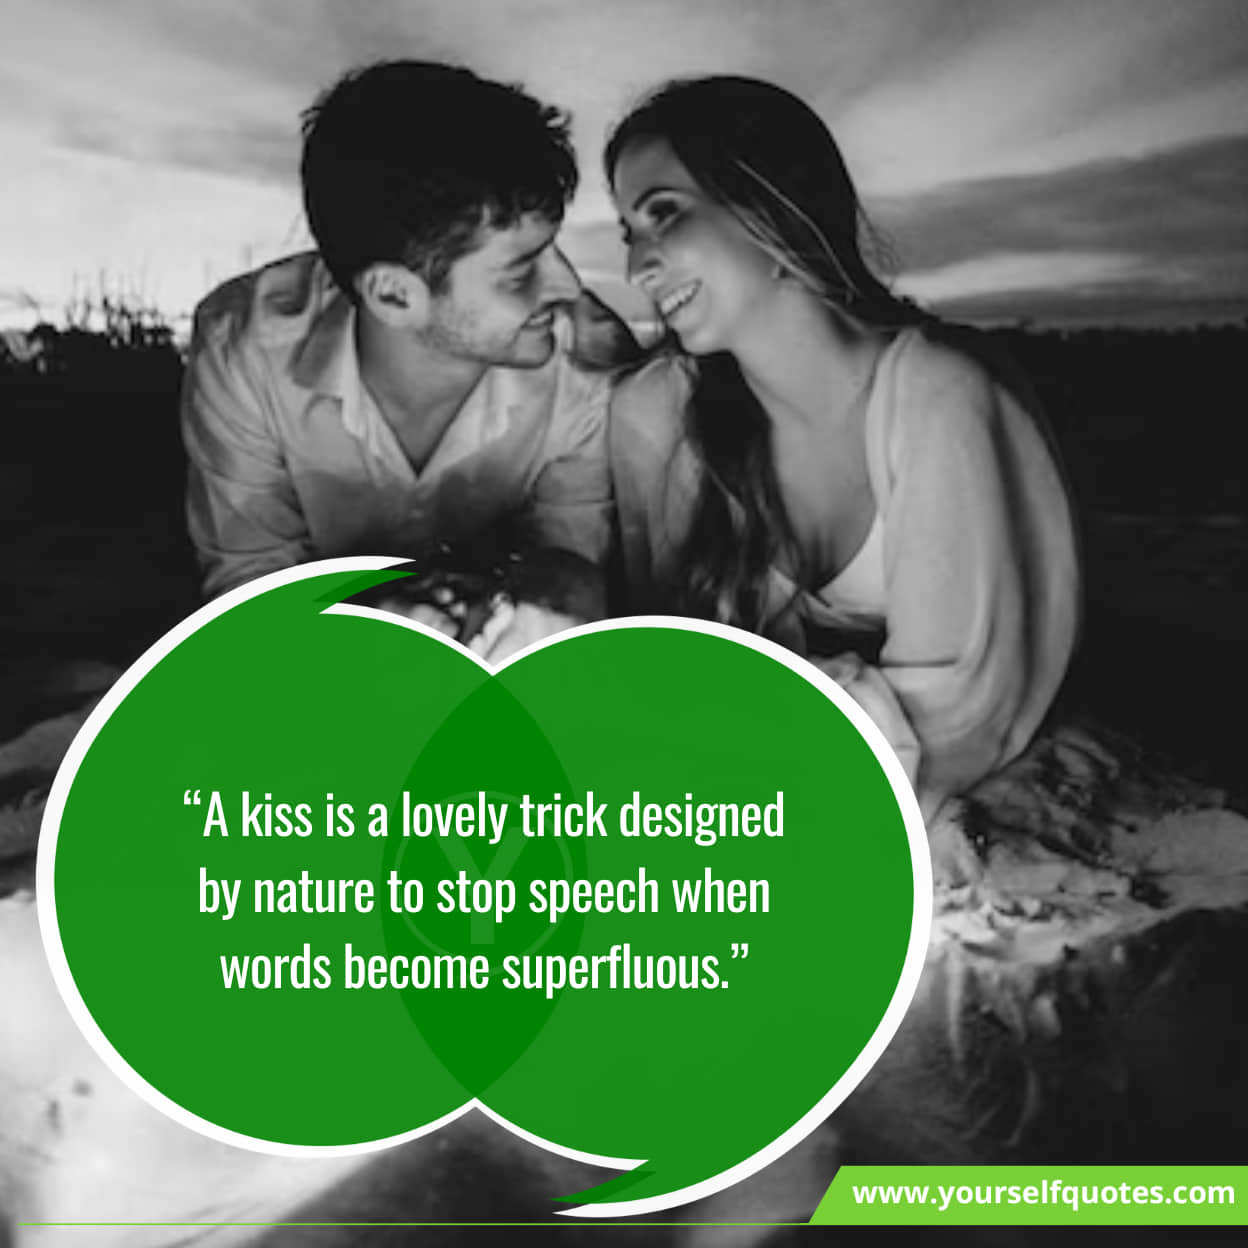 Love quotes for your boyfriend or husband